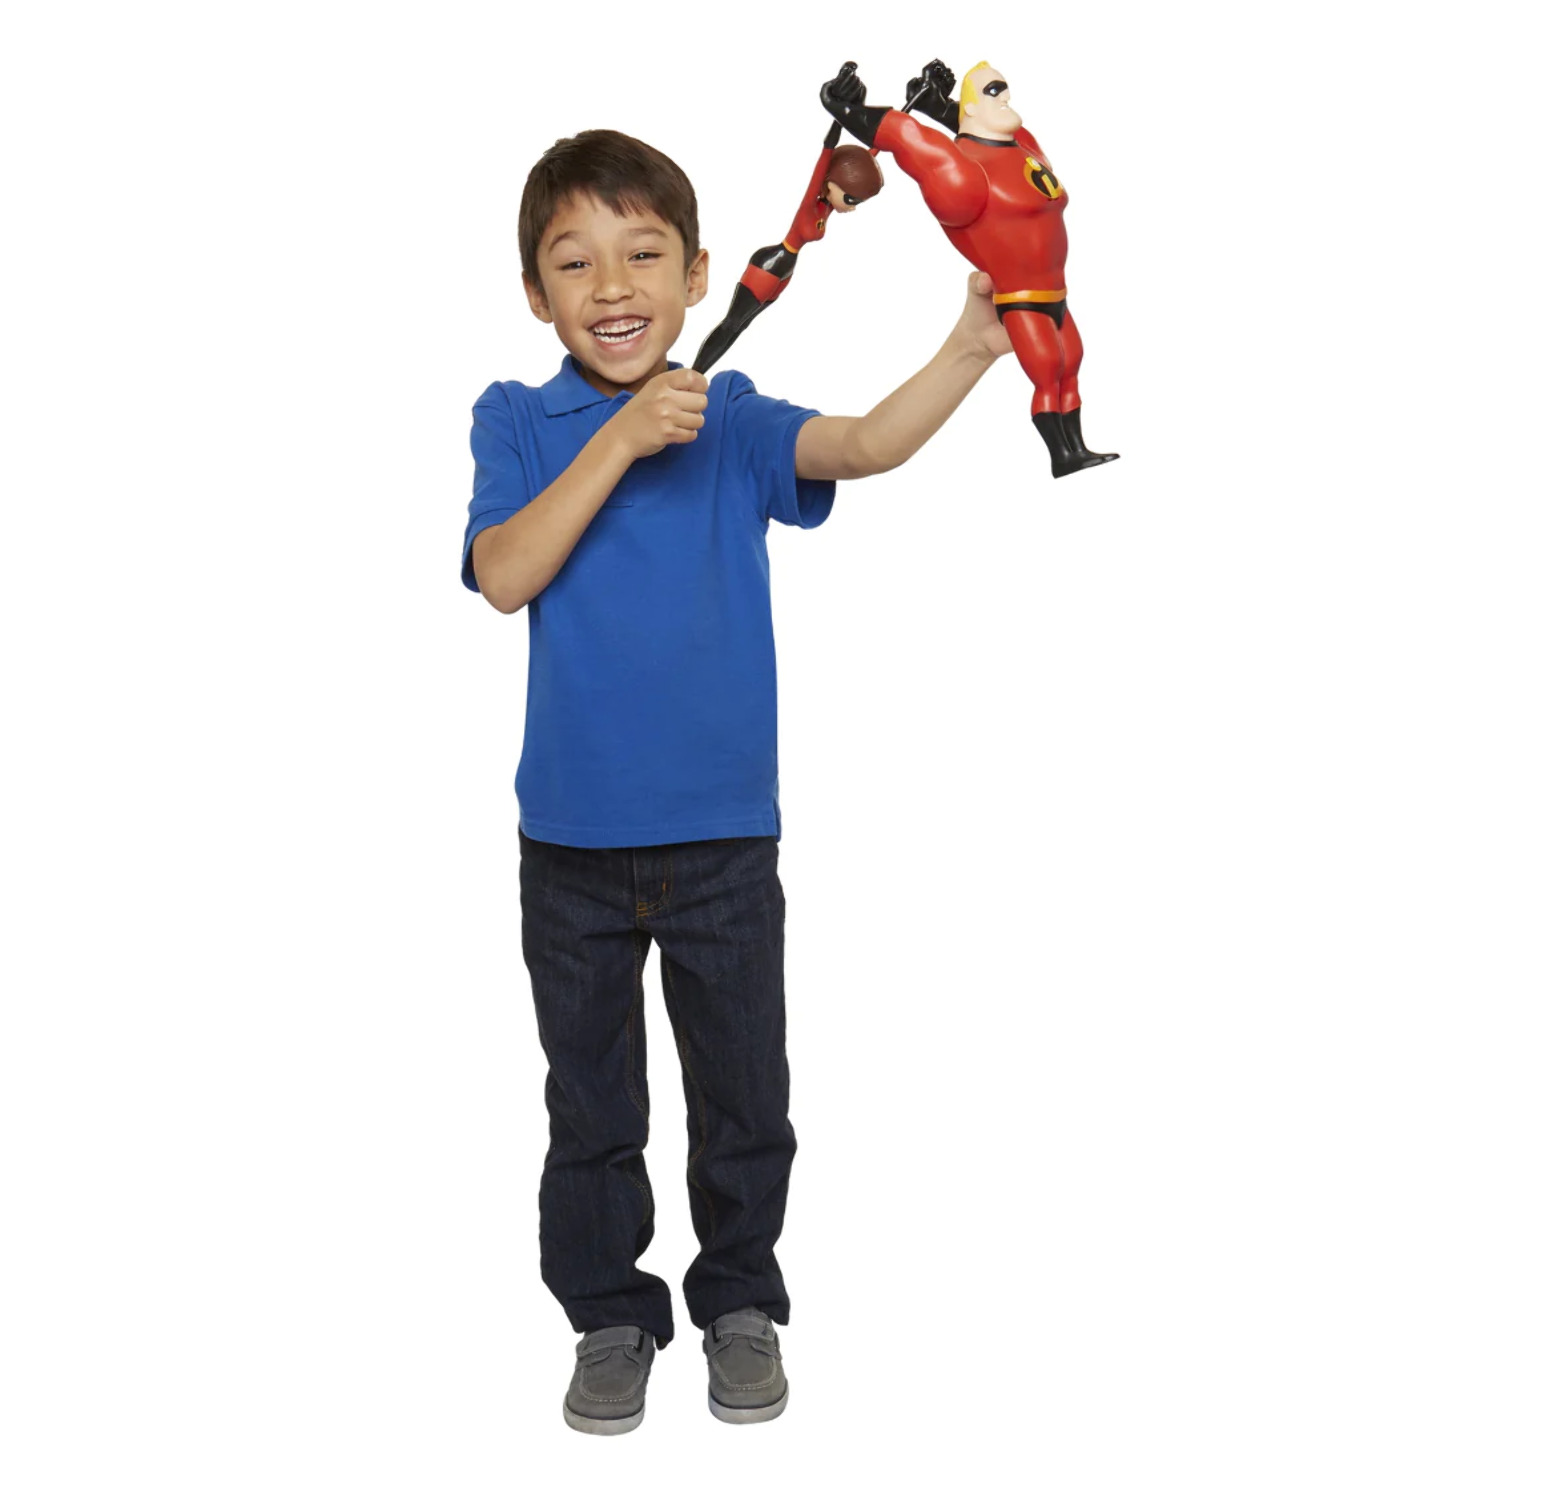 Incredibles 2 Power Couple Mr. Incredible and Elastigirl 12" Action Figures with Slingshot Feature - image 5 of 6